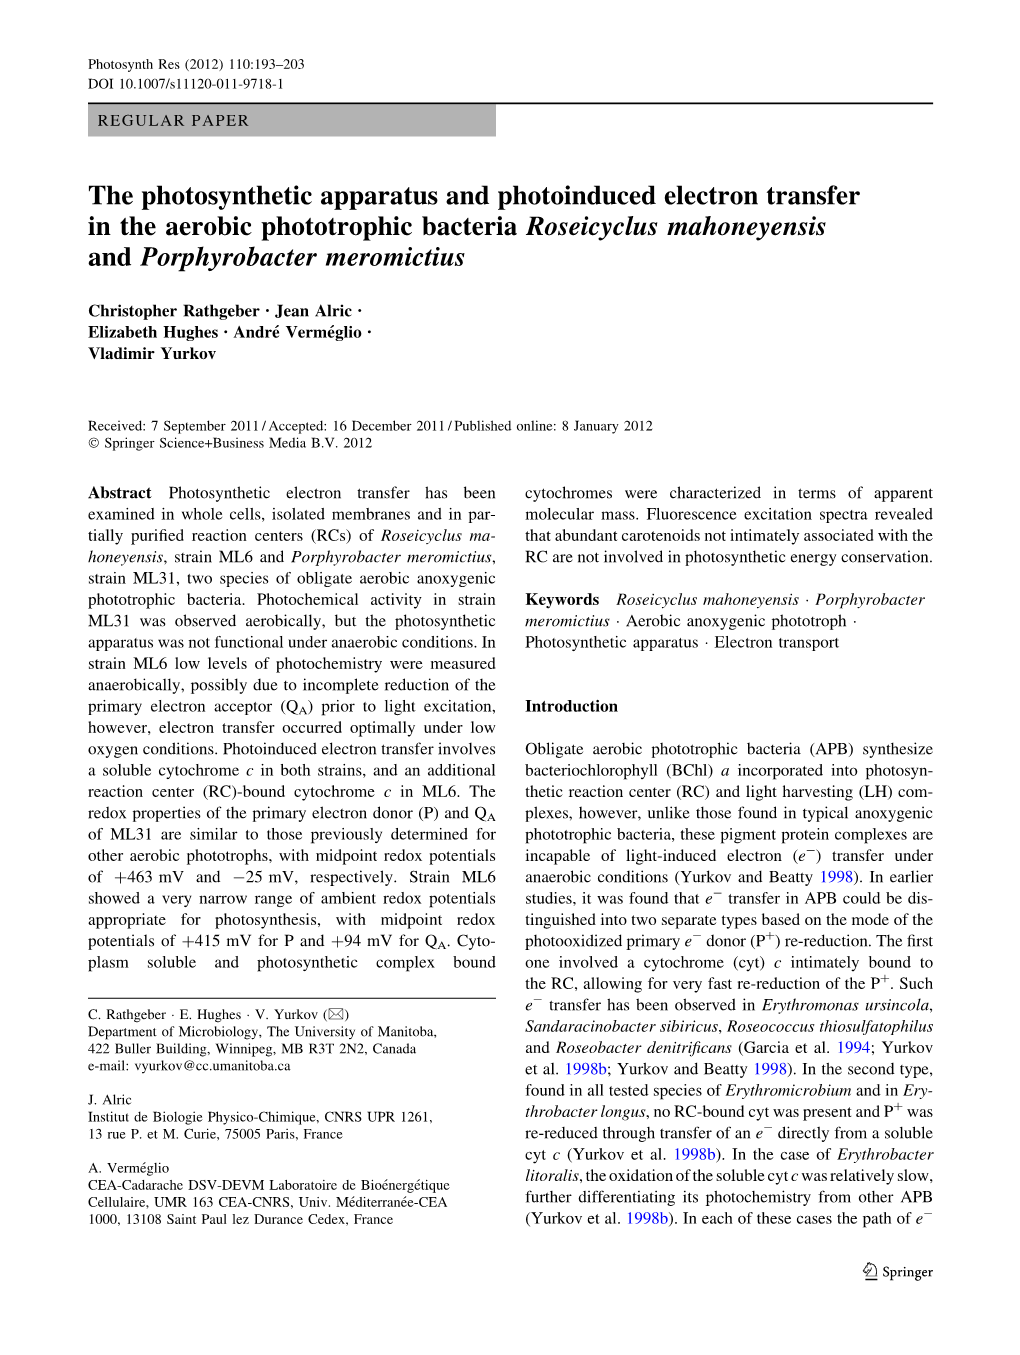 The Photosynthetic Apparatus and Photoinduced Electron Transfer in the Aerobic Phototrophic Bacteria Roseicyclus Mahoneyensis and Porphyrobacter Meromictius